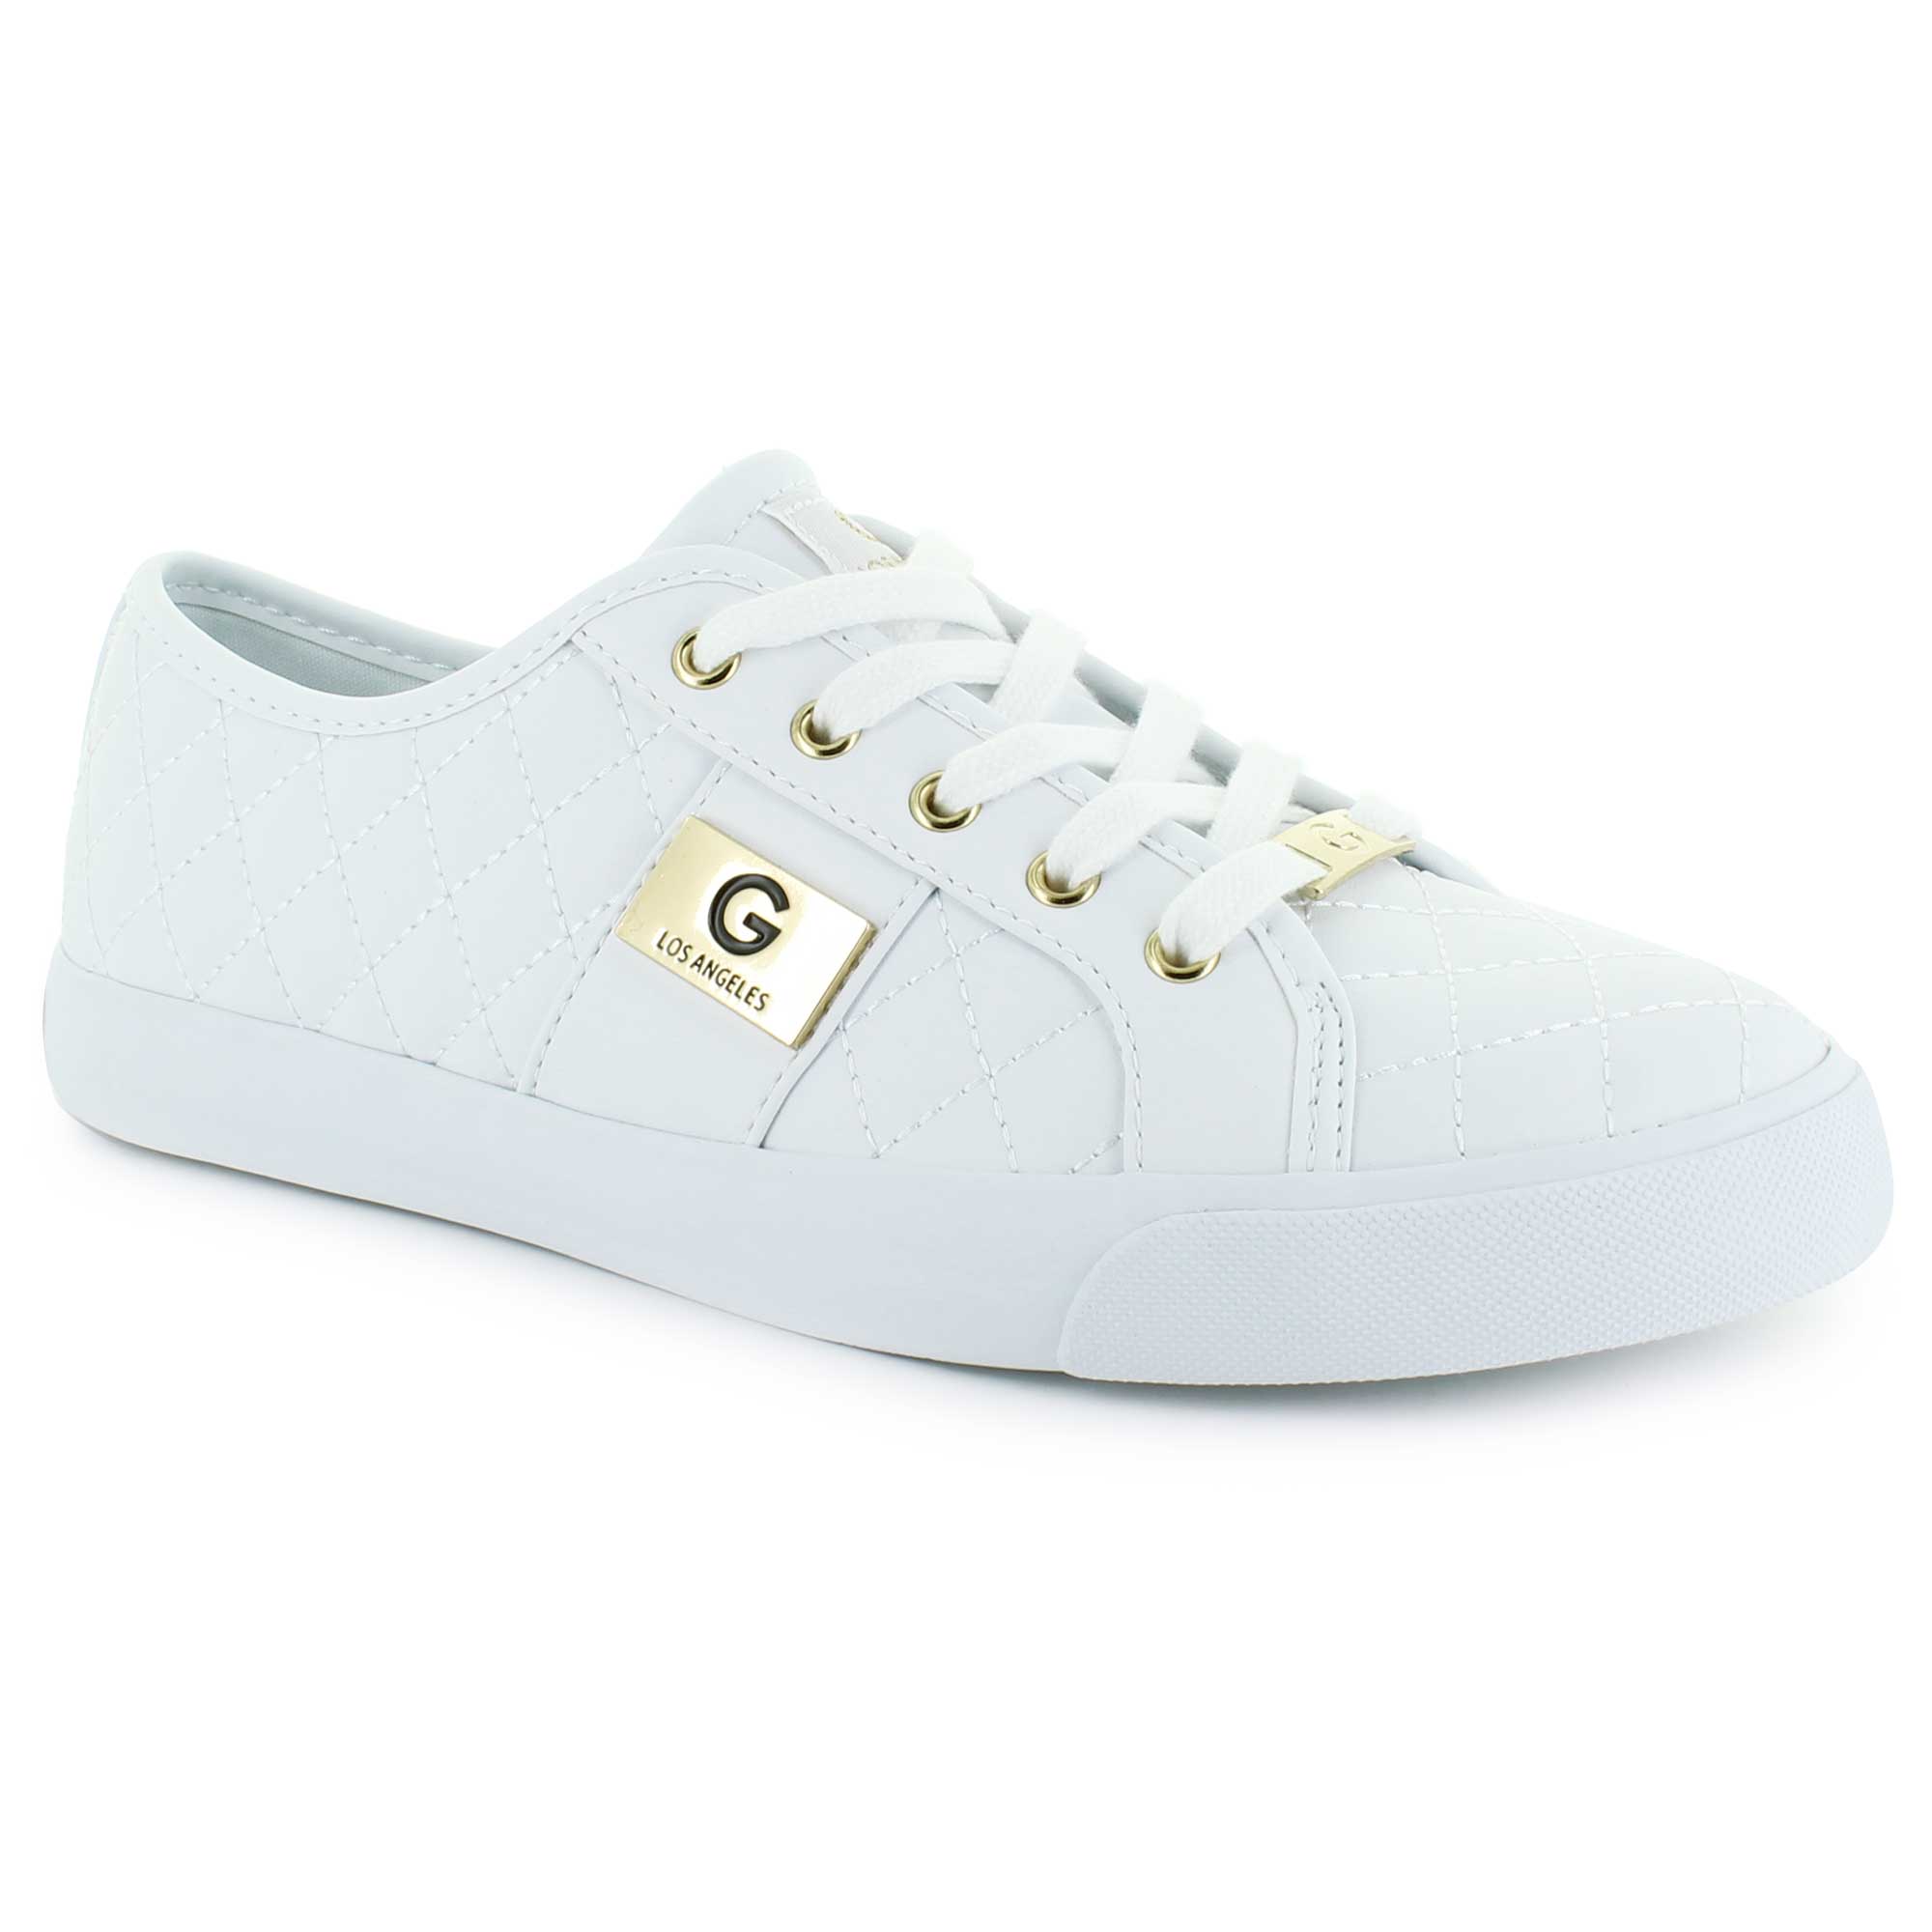 Problema Conejo Inaccesible G by Guess Backer 2 | SHOE DEPT ENCORE